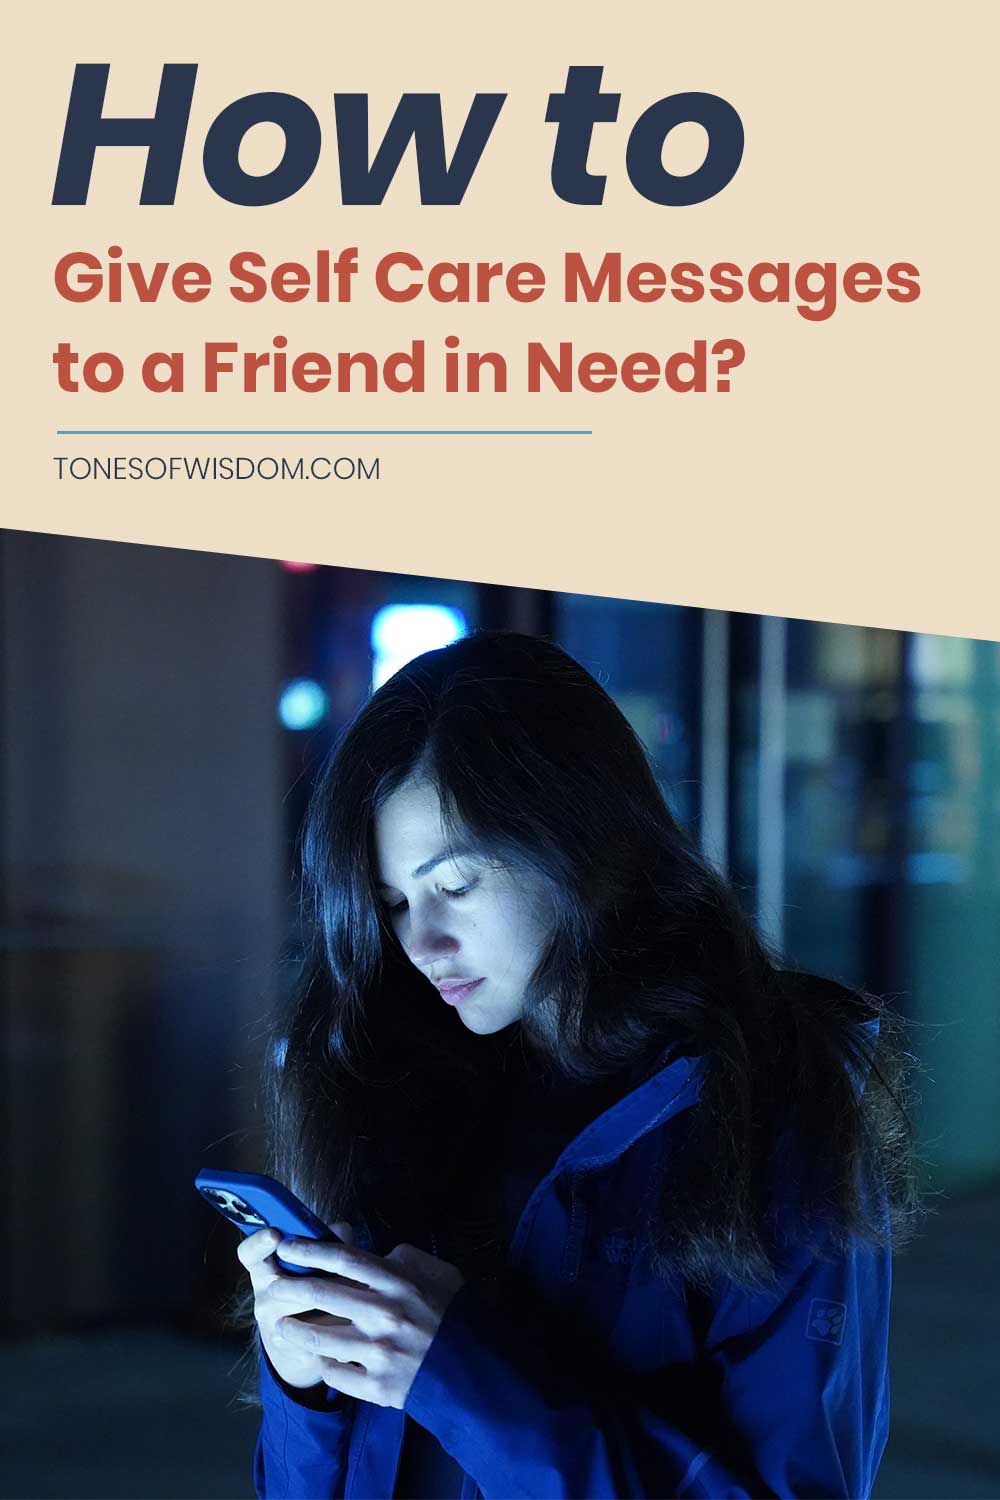 How to Give Self Care Messages to a Friend in Need?